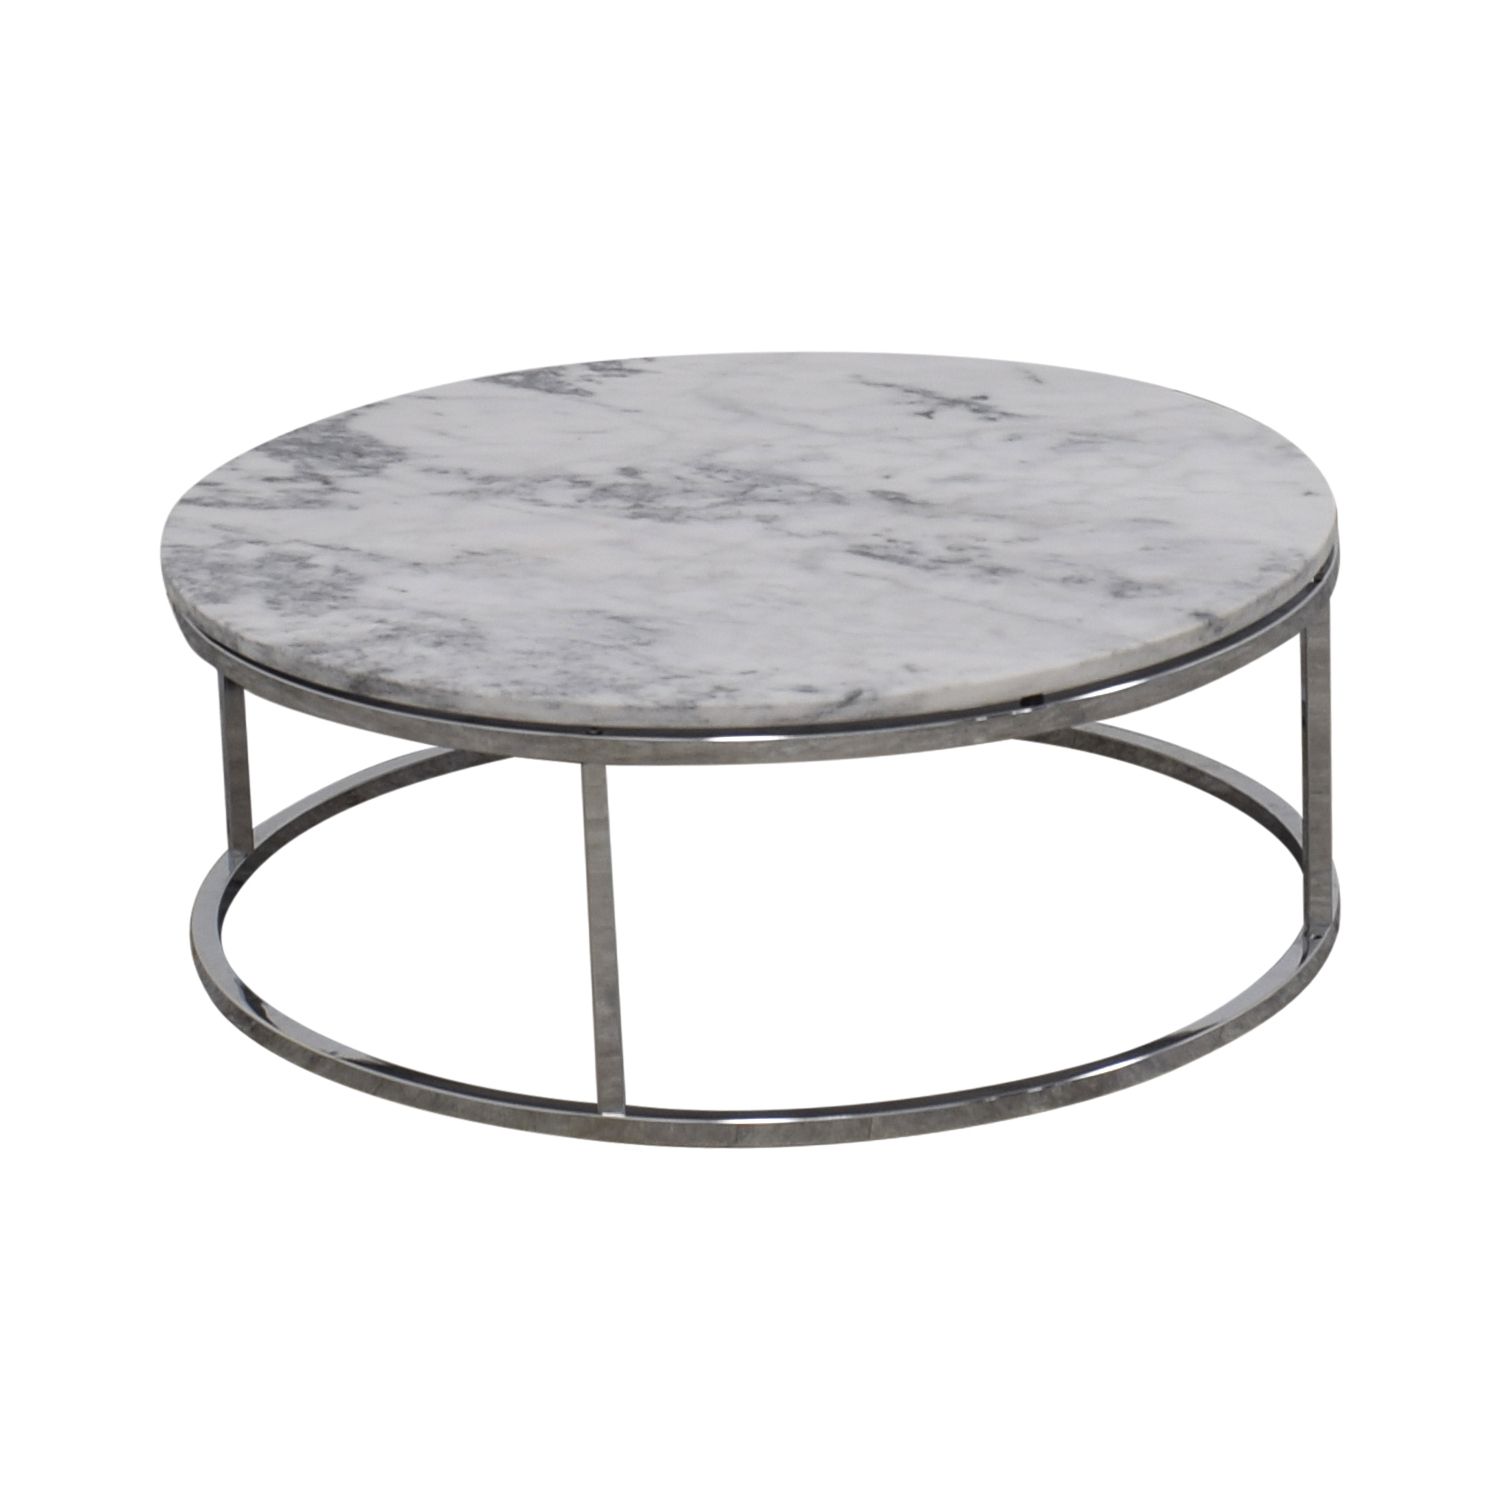 [%popular Marble And White Coffee Tables Pertaining To 57% Off – Cb2 Cb2 Round White Marble Coffee Table / Tables|57% Off – Cb2 Cb2 Round White Marble Coffee Table / Tables Throughout Widely Used Marble And White Coffee Tables%] (Gallery 4 of 20)